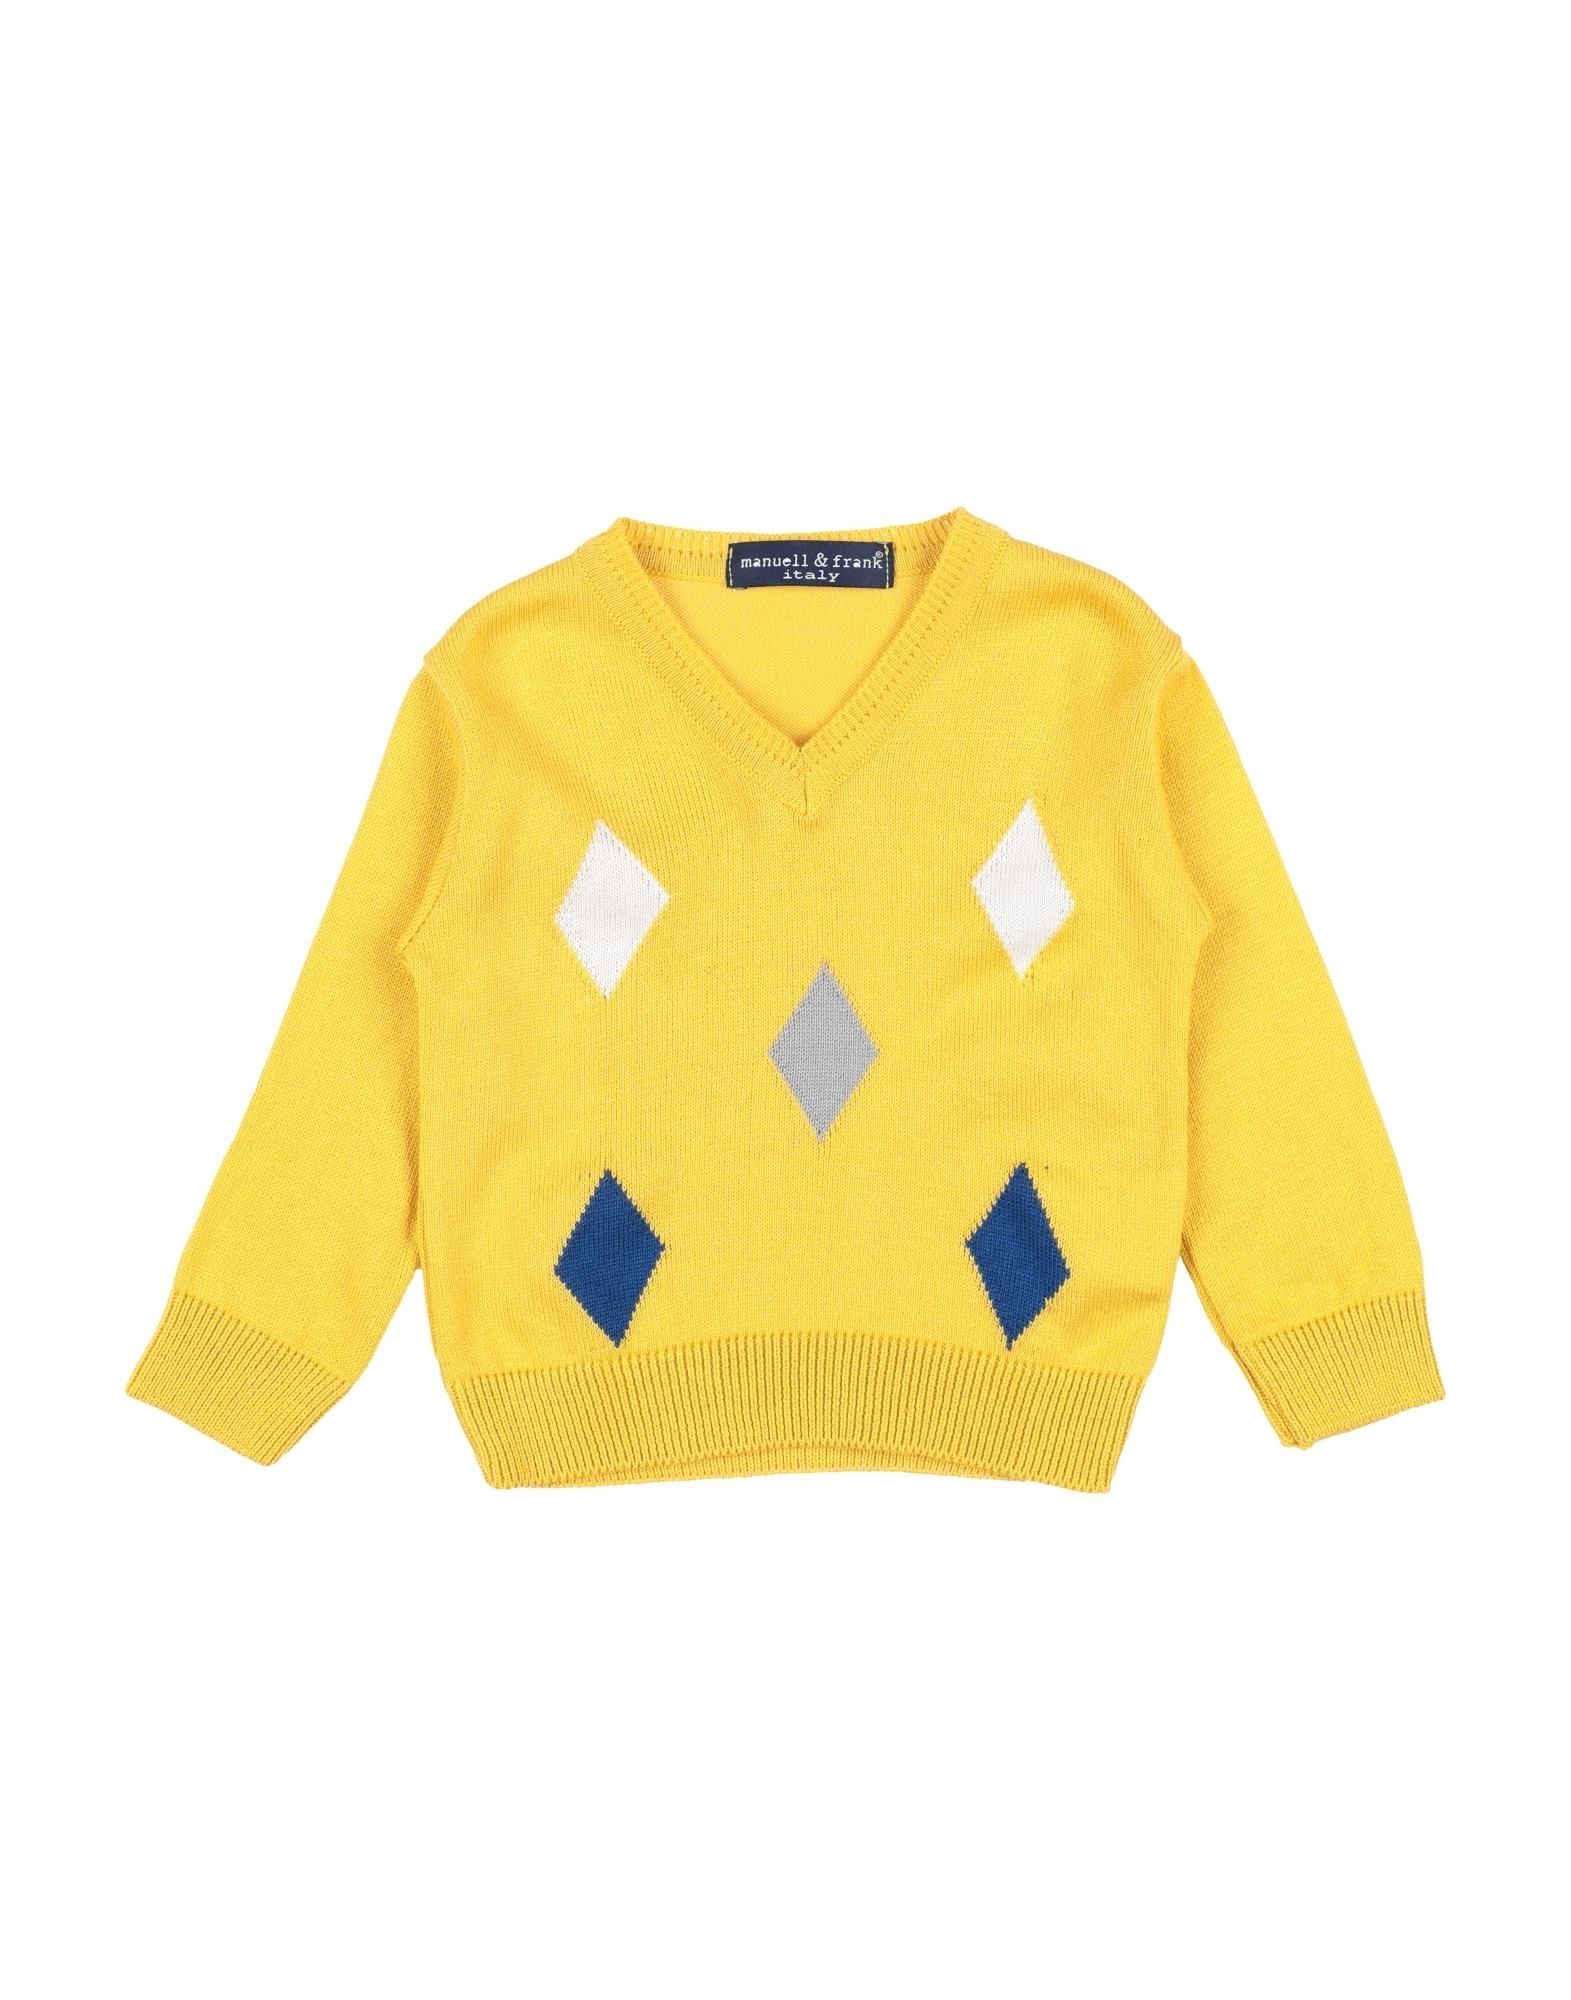 Manuell & Frank Kids' Sweaters In Yellow